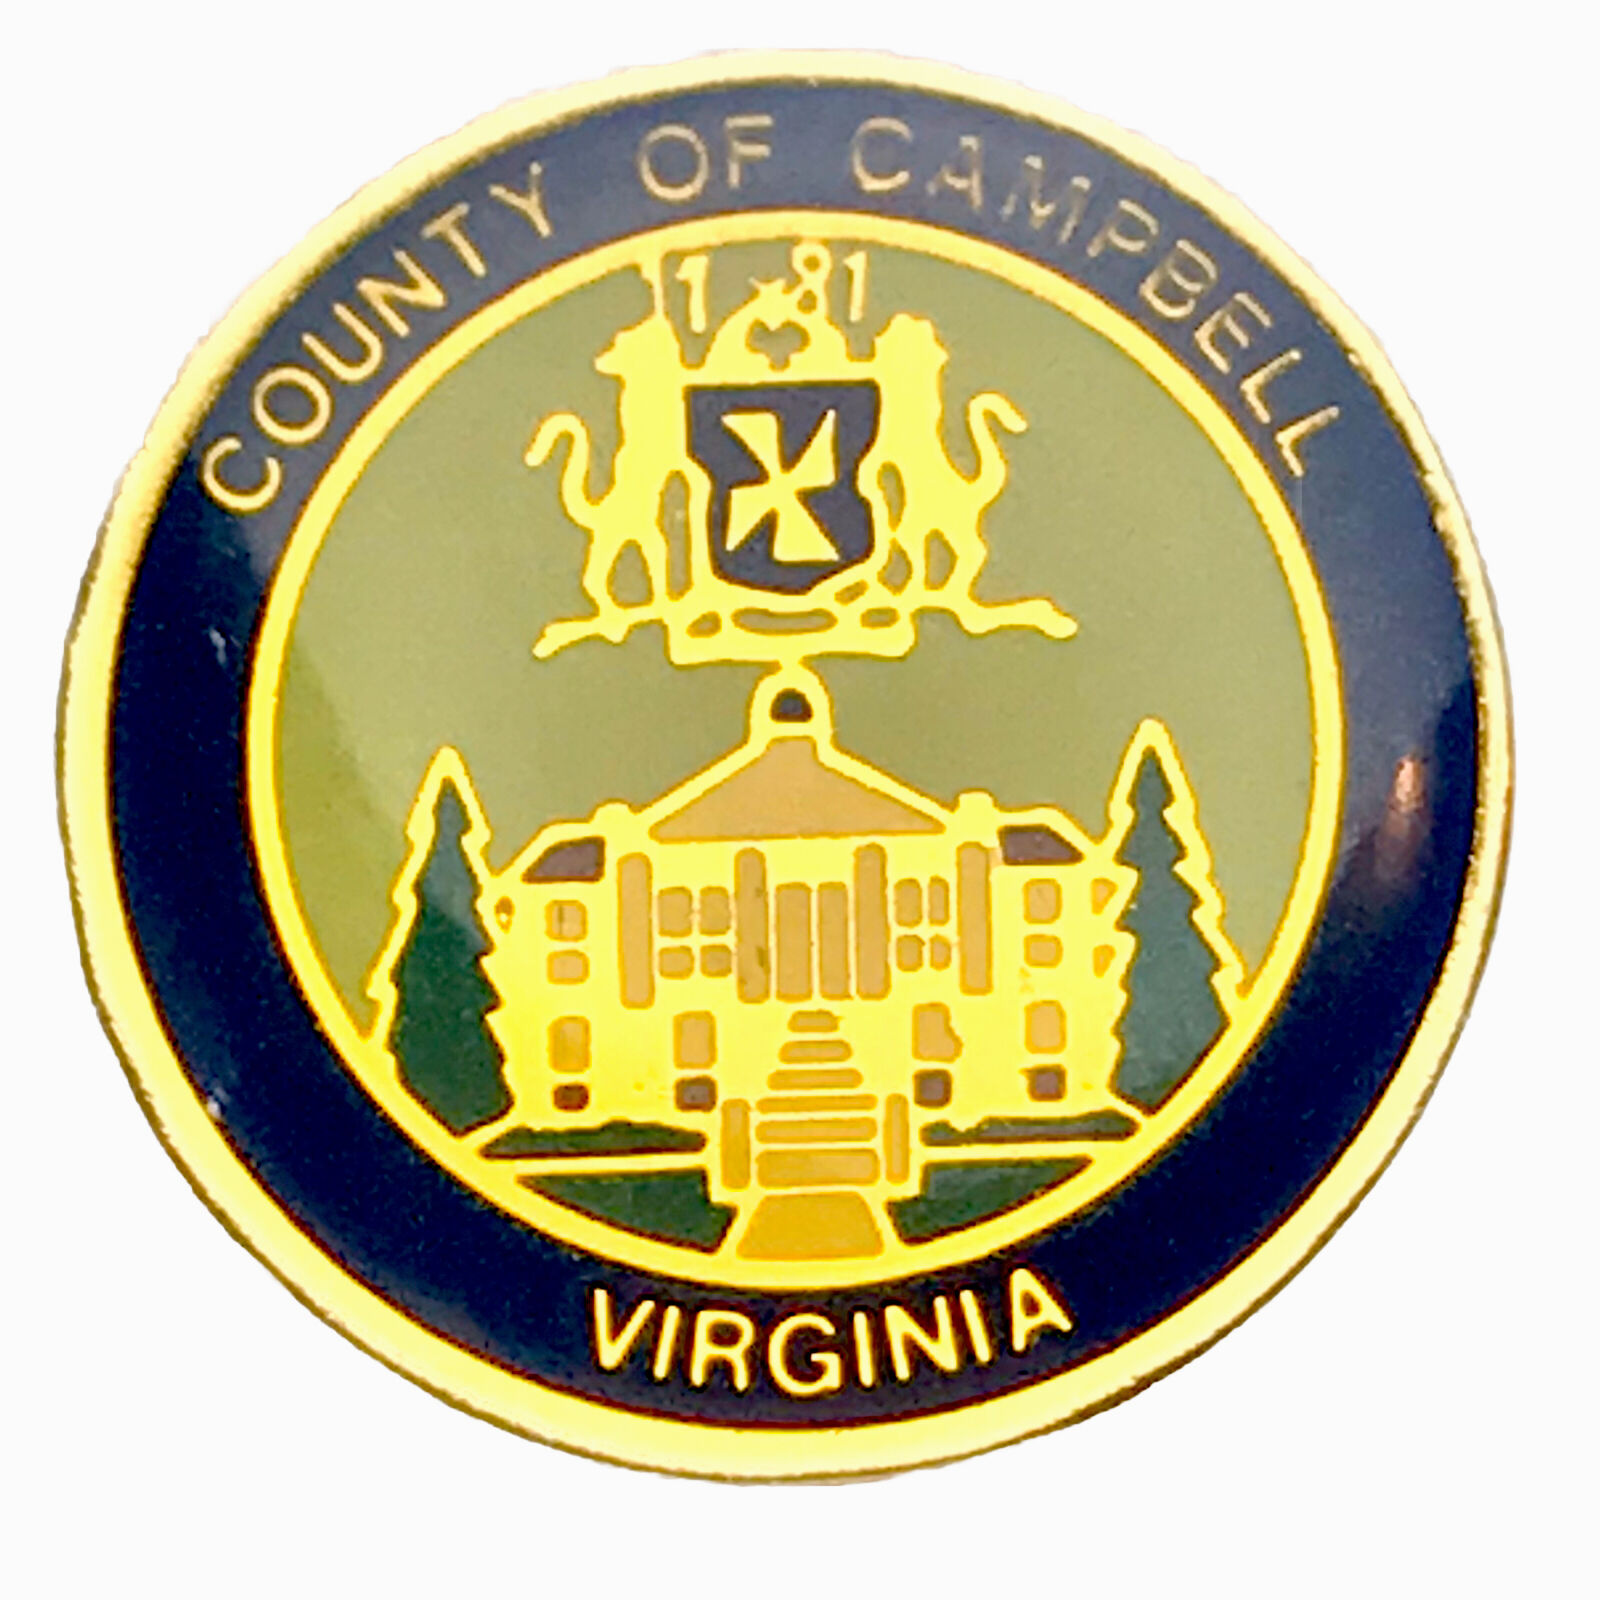 County Of Campbell Virginia Pin Gold Tone Enamel Vintage